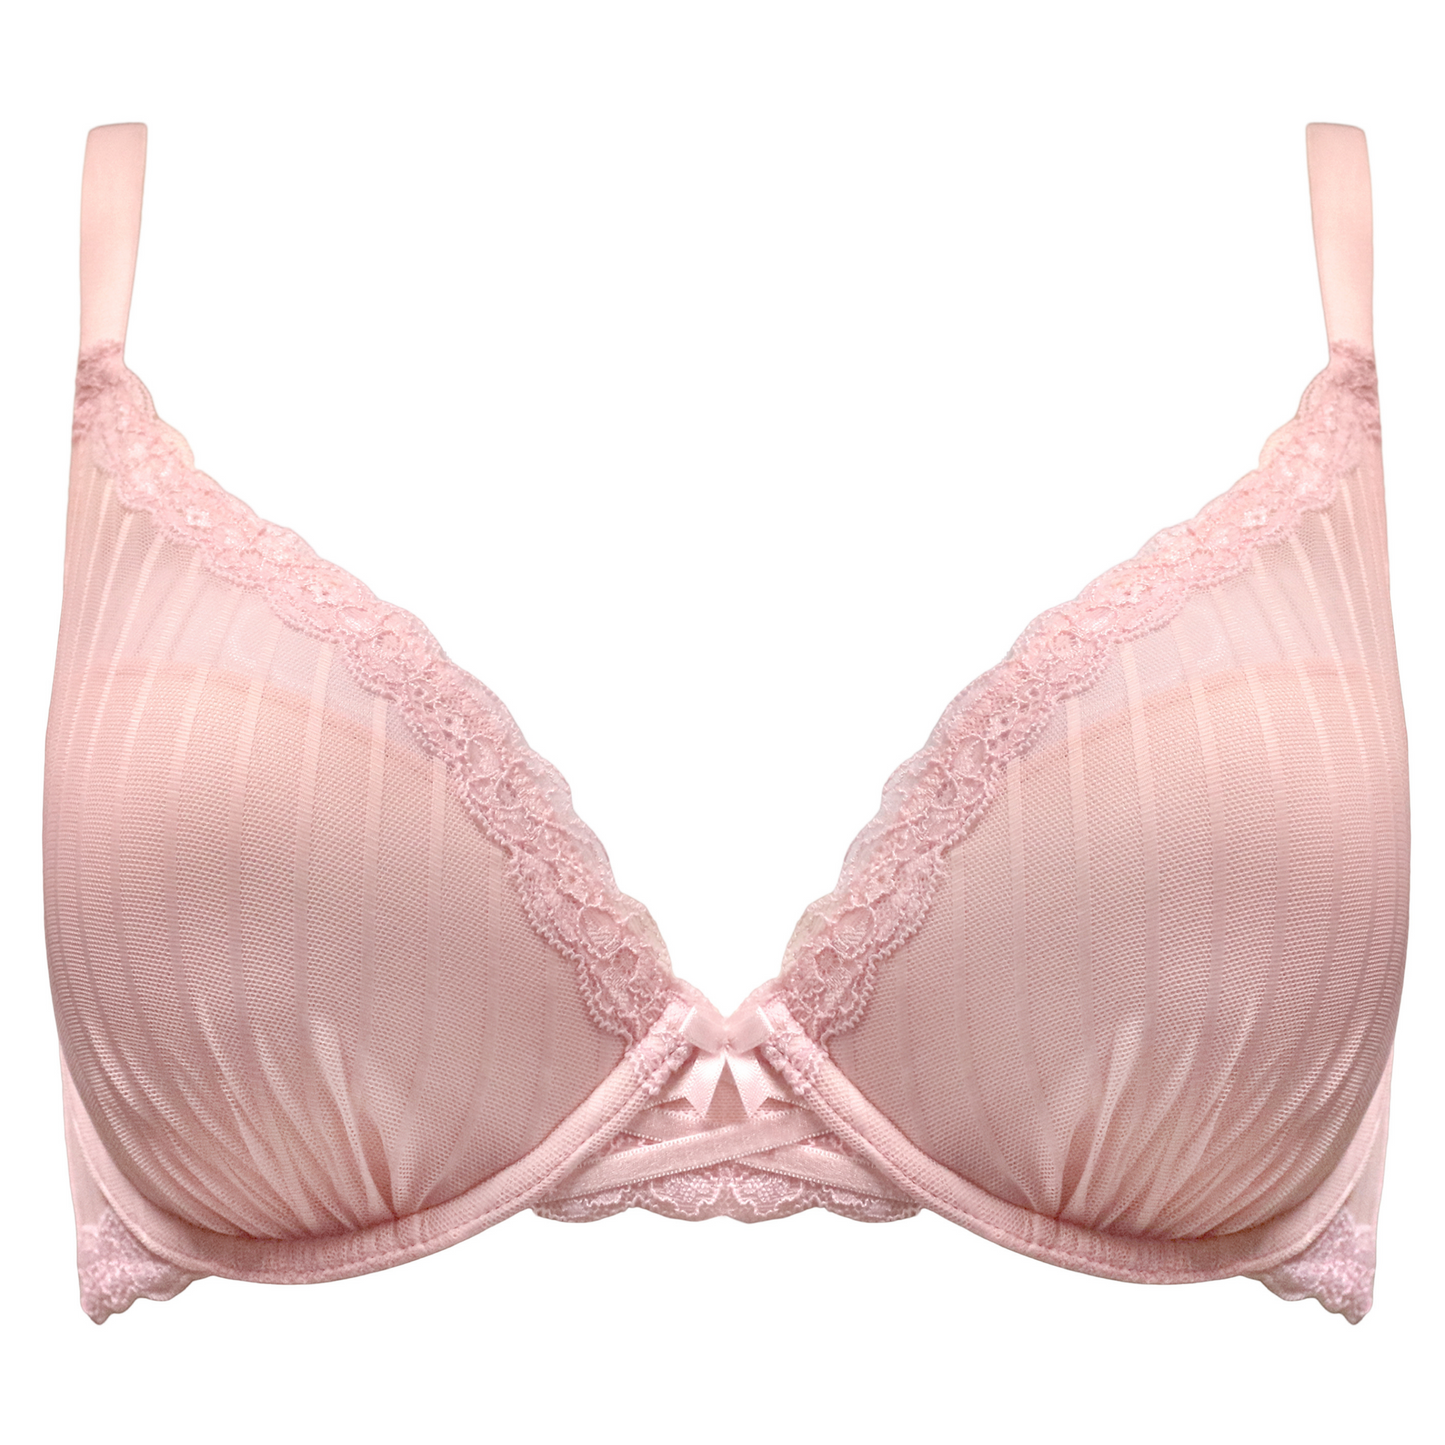 Luxe Linear Lightly Padded Bra In Soft Pink - Pour Moi